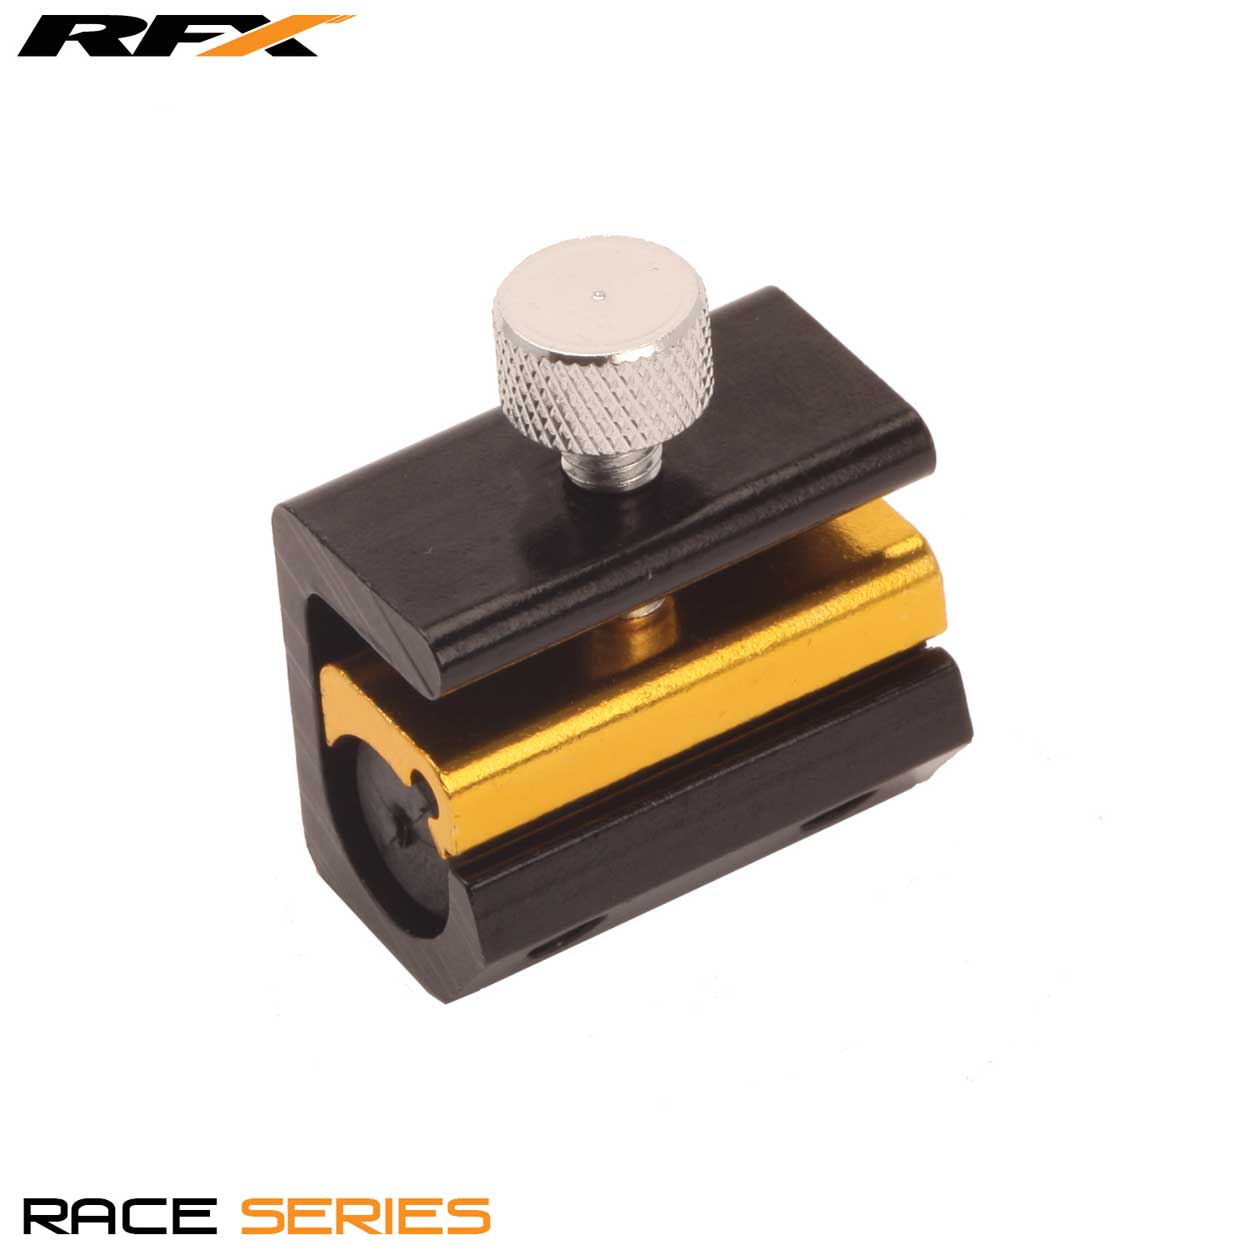 RFX Race Cable Oiler (Black) Universal to suit all Cables - Black - RFX